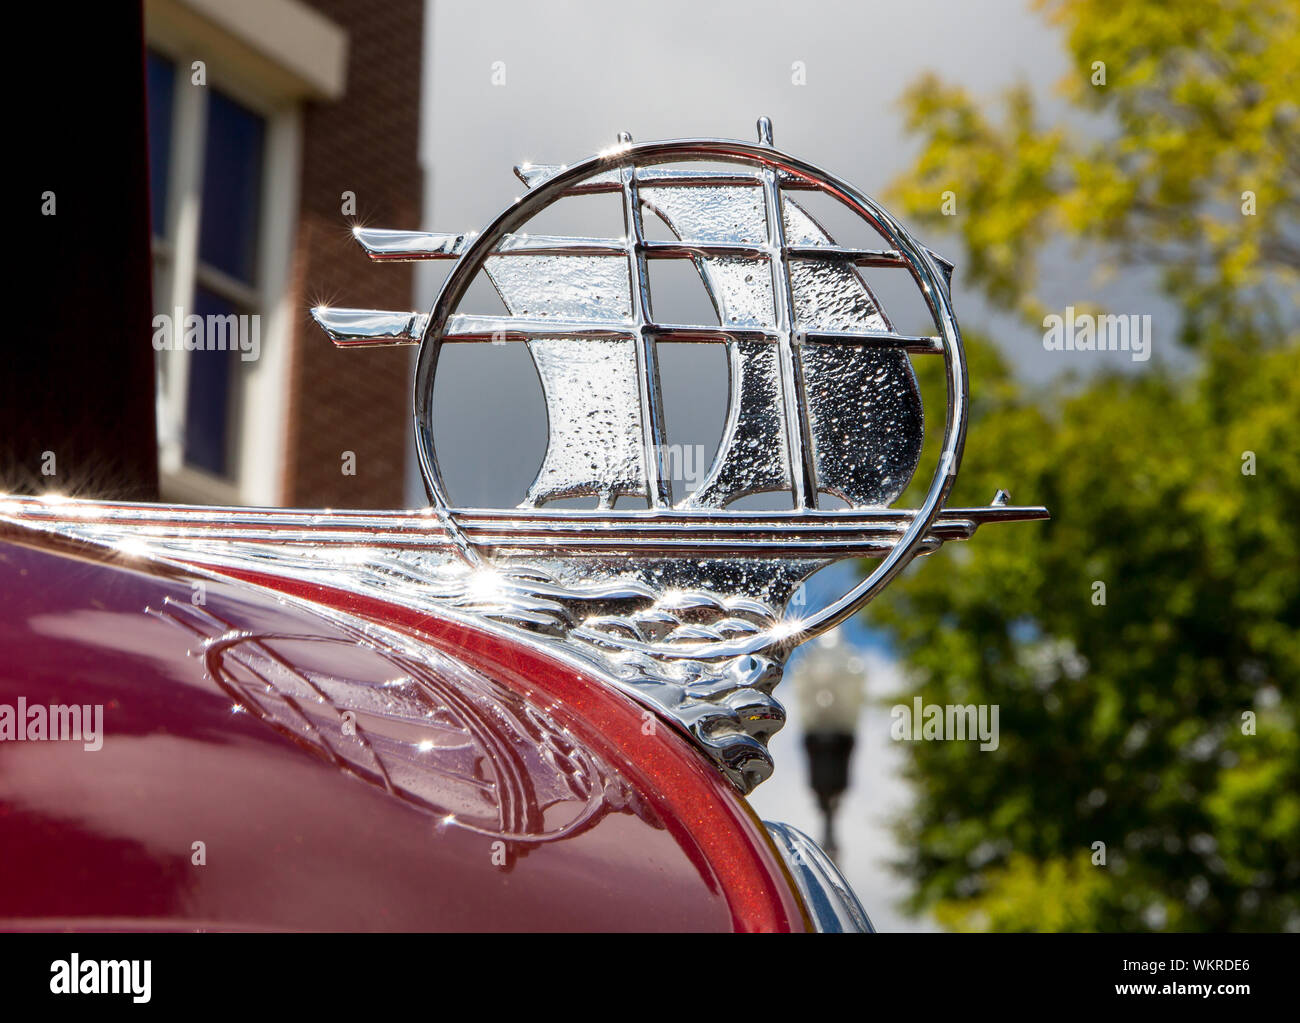 Closeup of a 1934 Plymouth automobile hood ornament on display at a classic car show in Matthews, North Carolina. Stock Photo